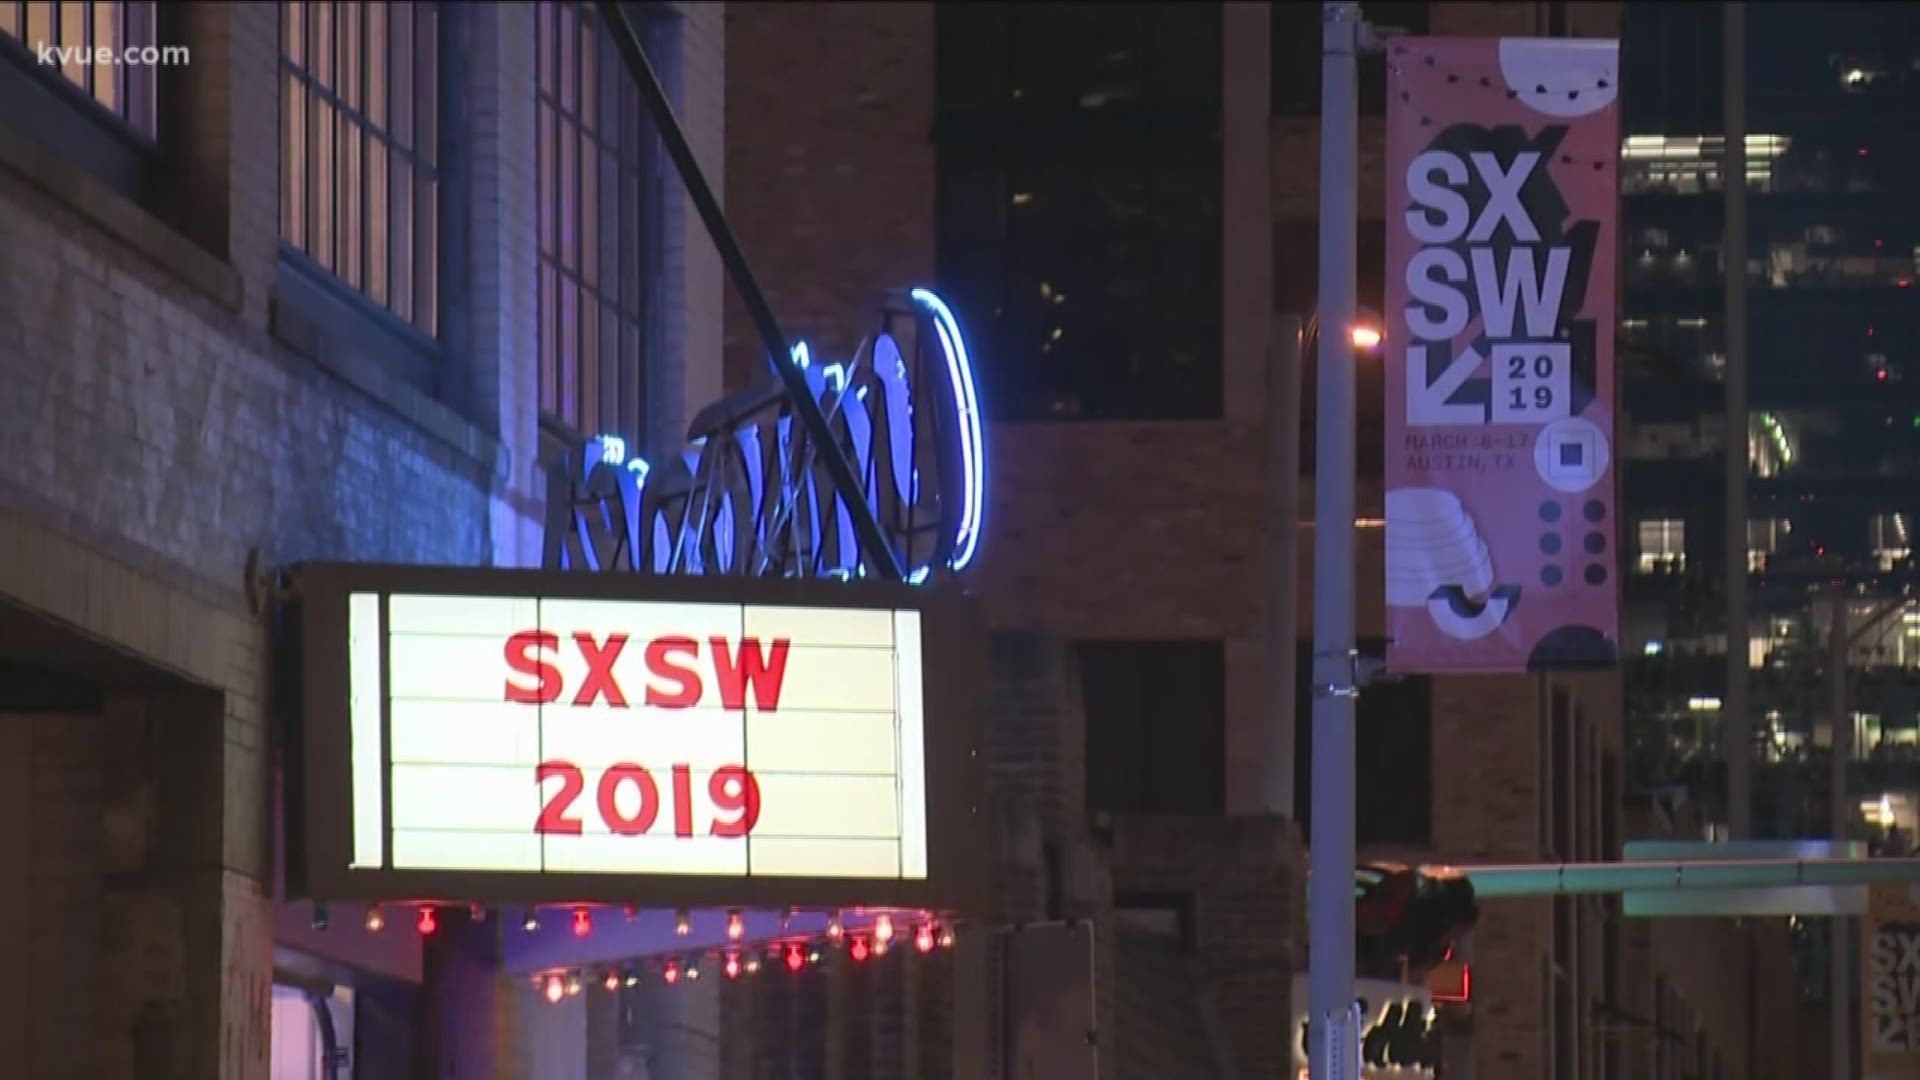 As SXSW 2019 wraps up, we look back on the who, what, when, where and why of this year's festival.